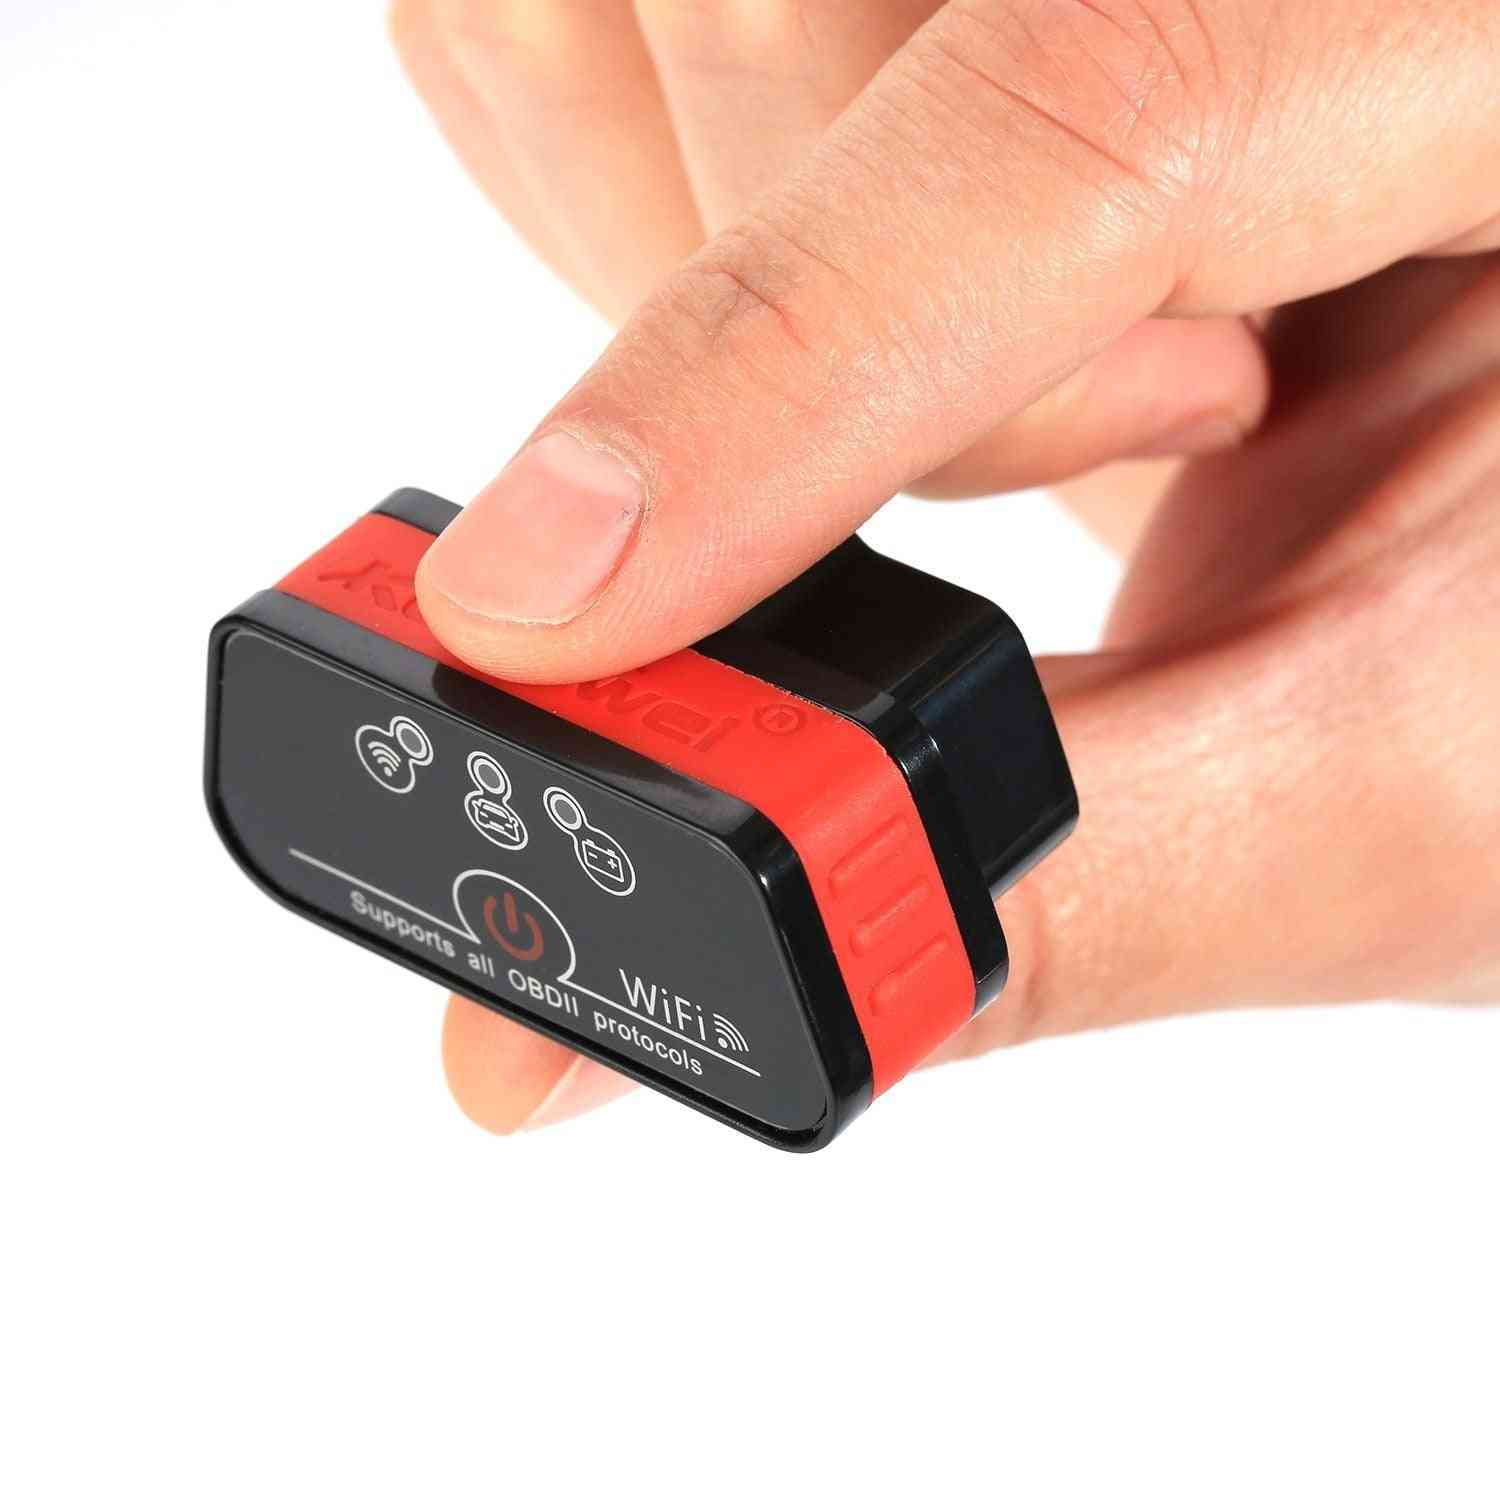 Wi-fi Obd2 Bluetooth Scanner For Android/pc/ios Obdii Code Reader